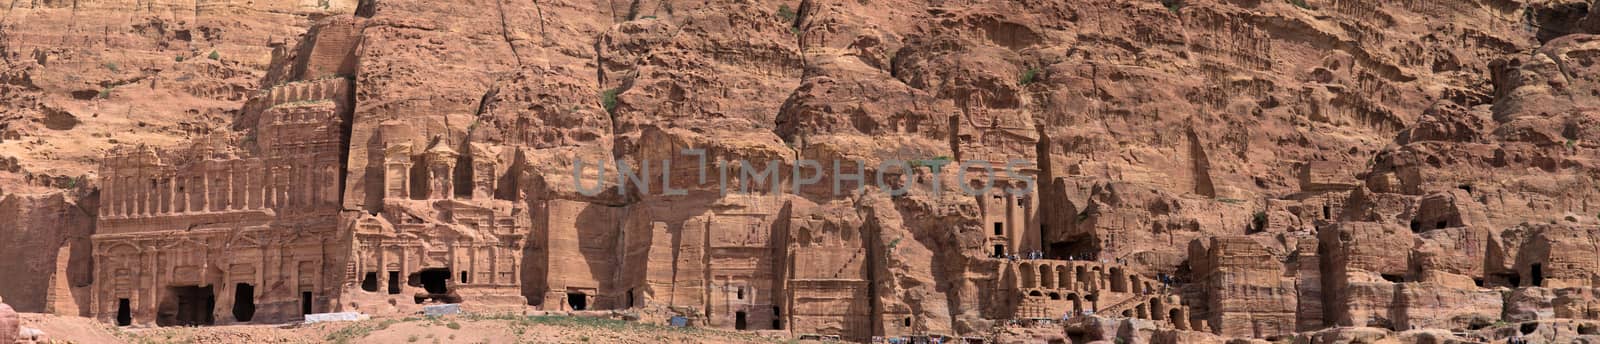 High resolution panorama of the rock city of Petra, Wadi Musa, Jordan, composed of several photos, by geogif